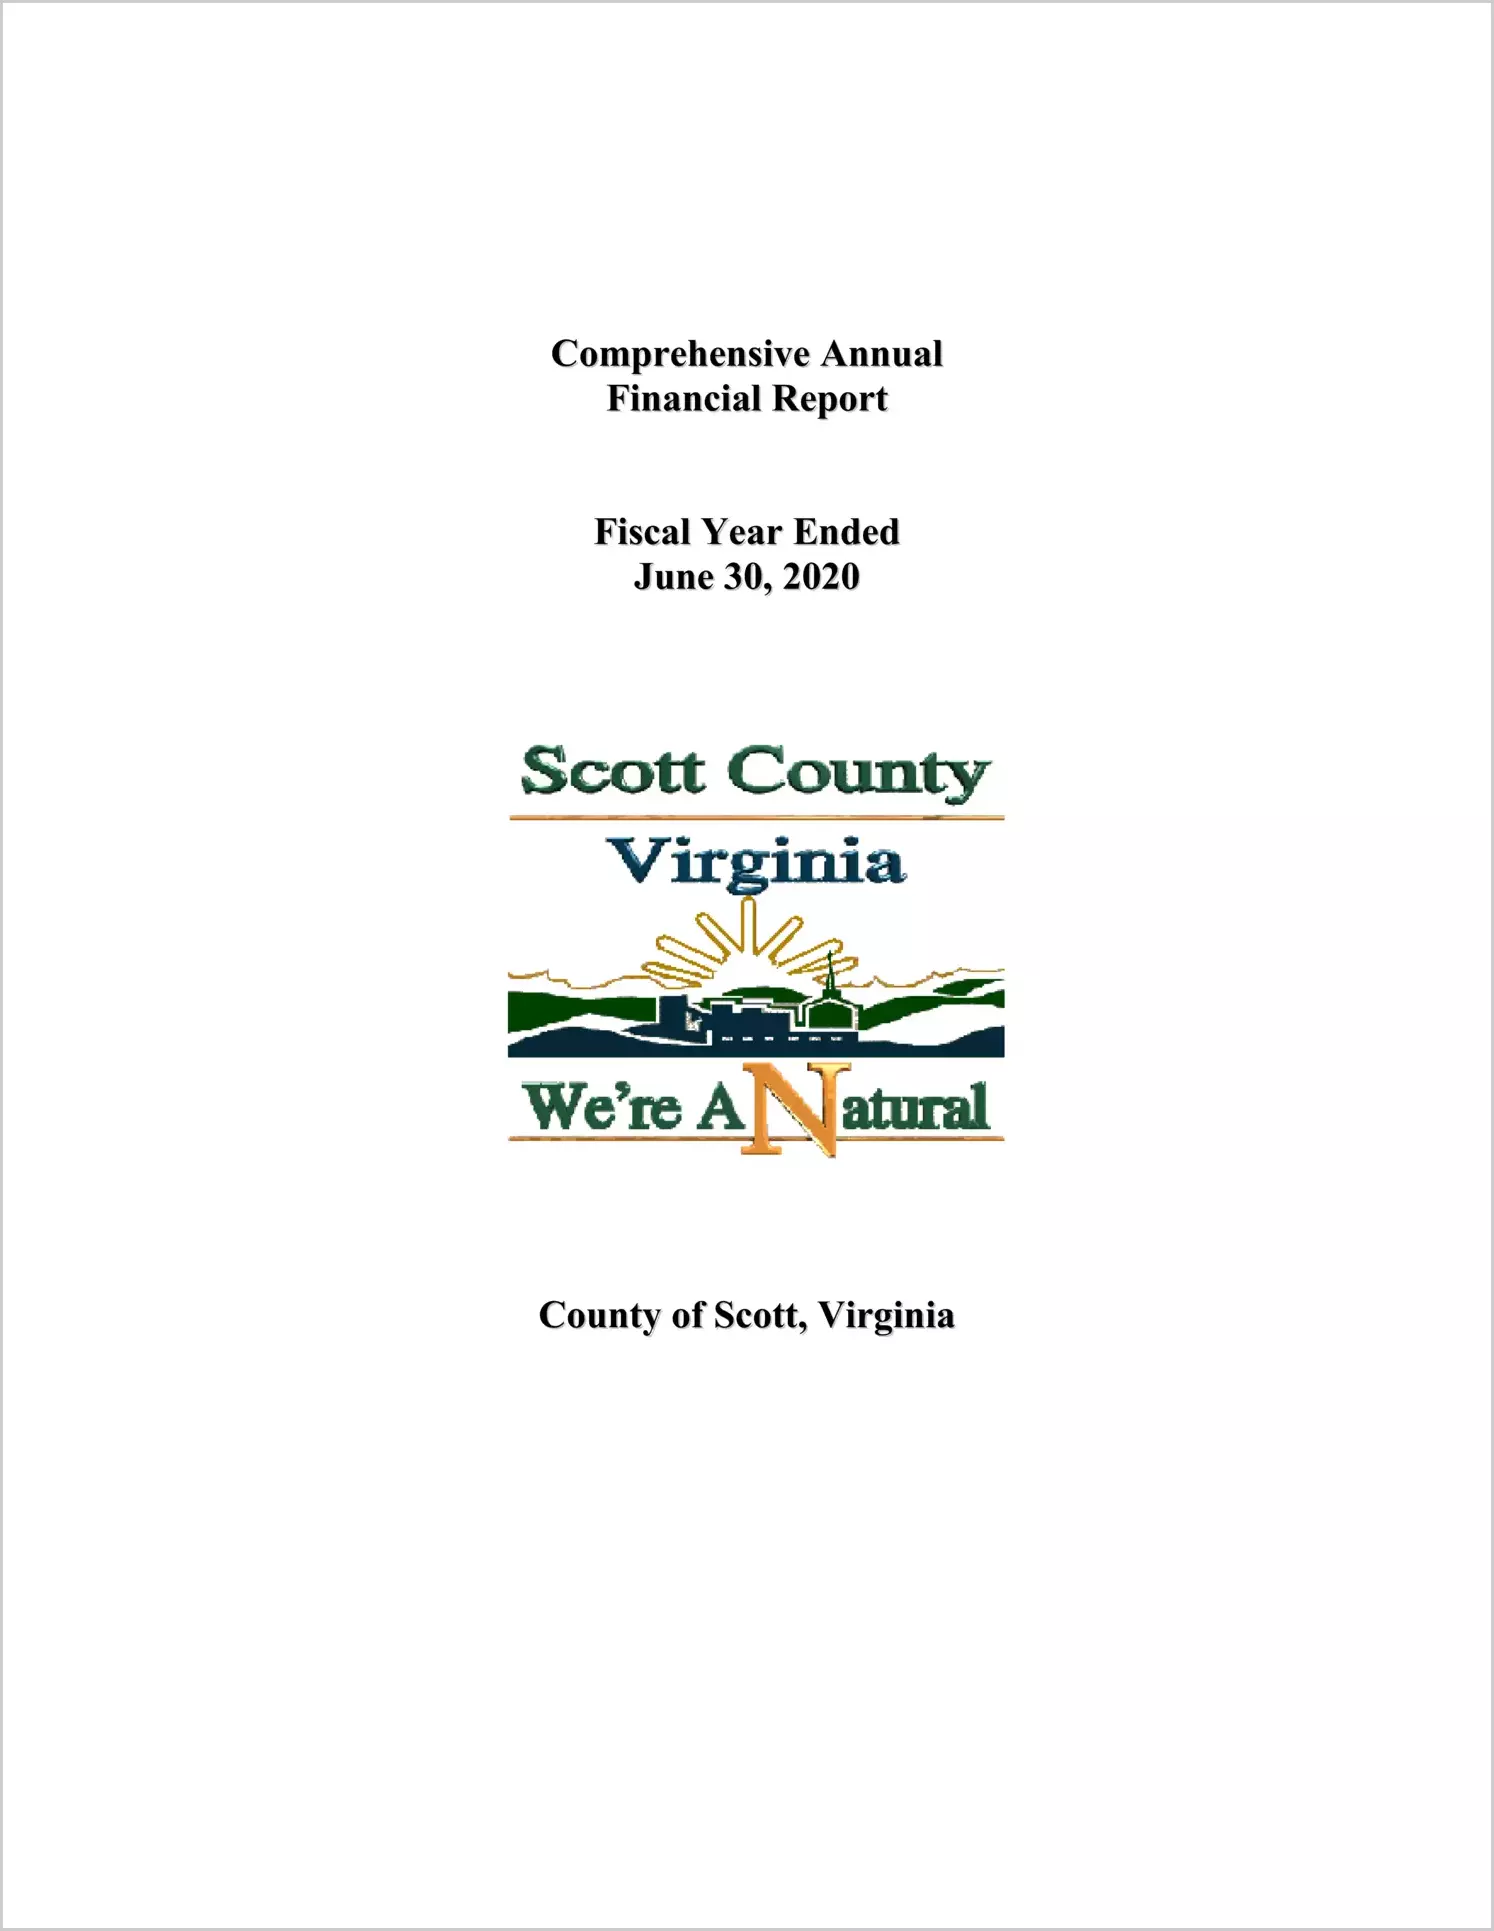 2020 Annual Financial Report for County of Scott